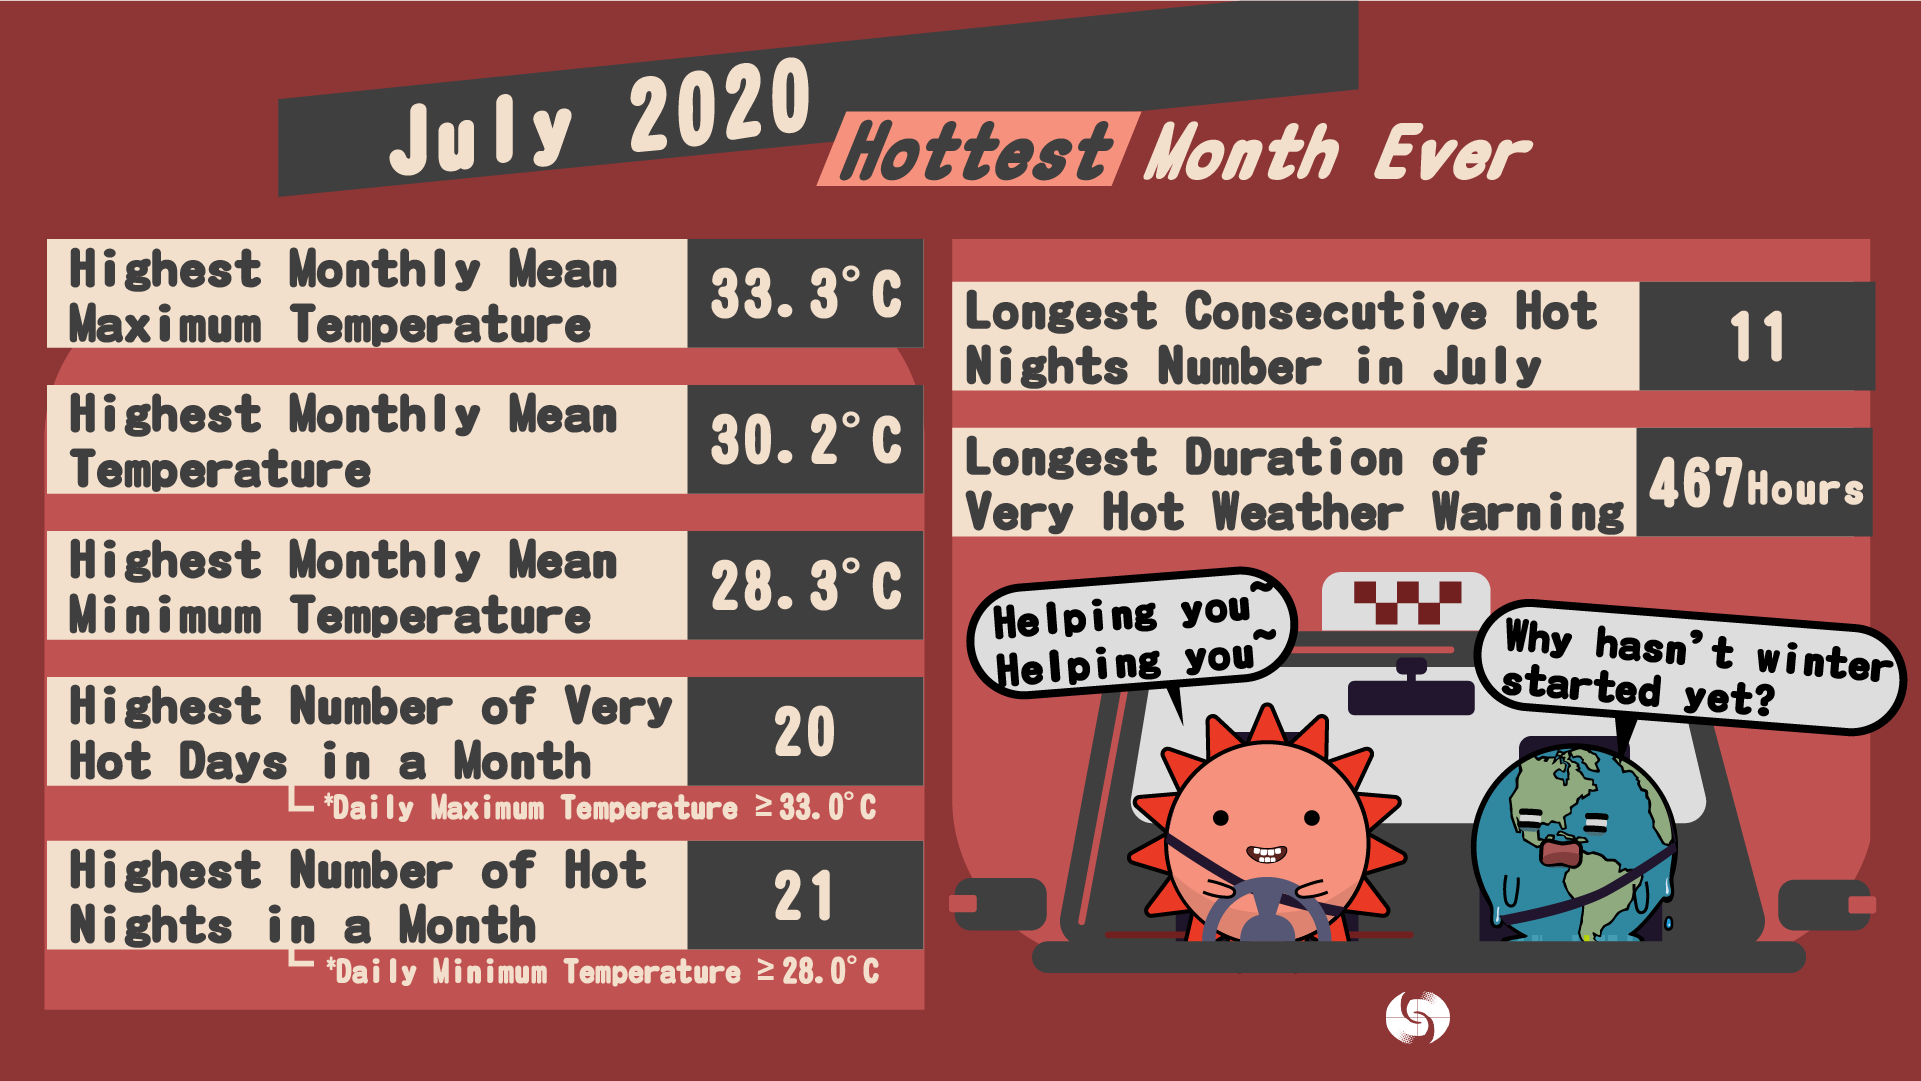 July 2020 - Hong Kong's Hottest Month Ever